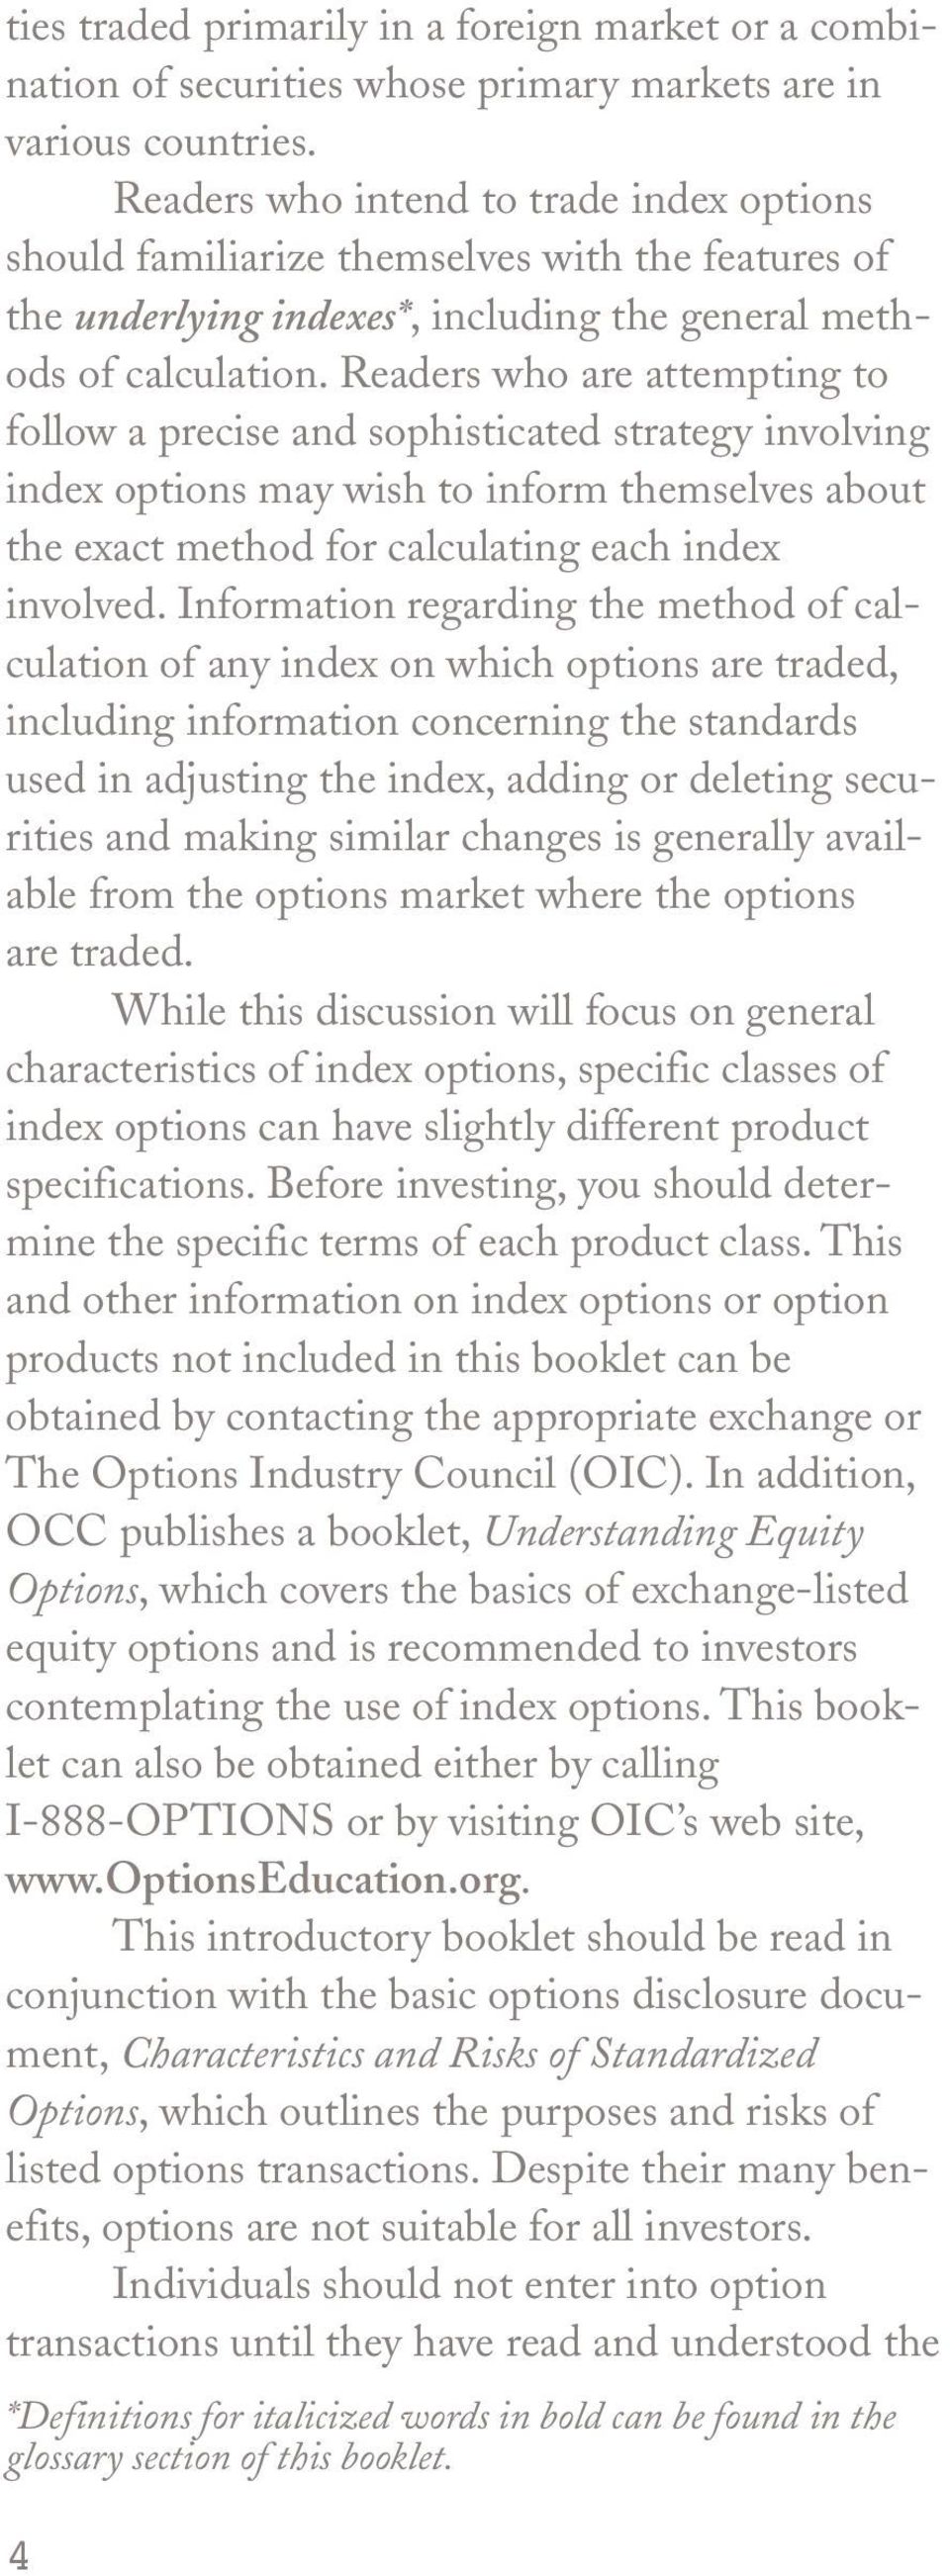 Readers who are attempting to follow a precise and sophisticated strategy involving index options may wish to inform themselves about the exact method for calculating each index involved.